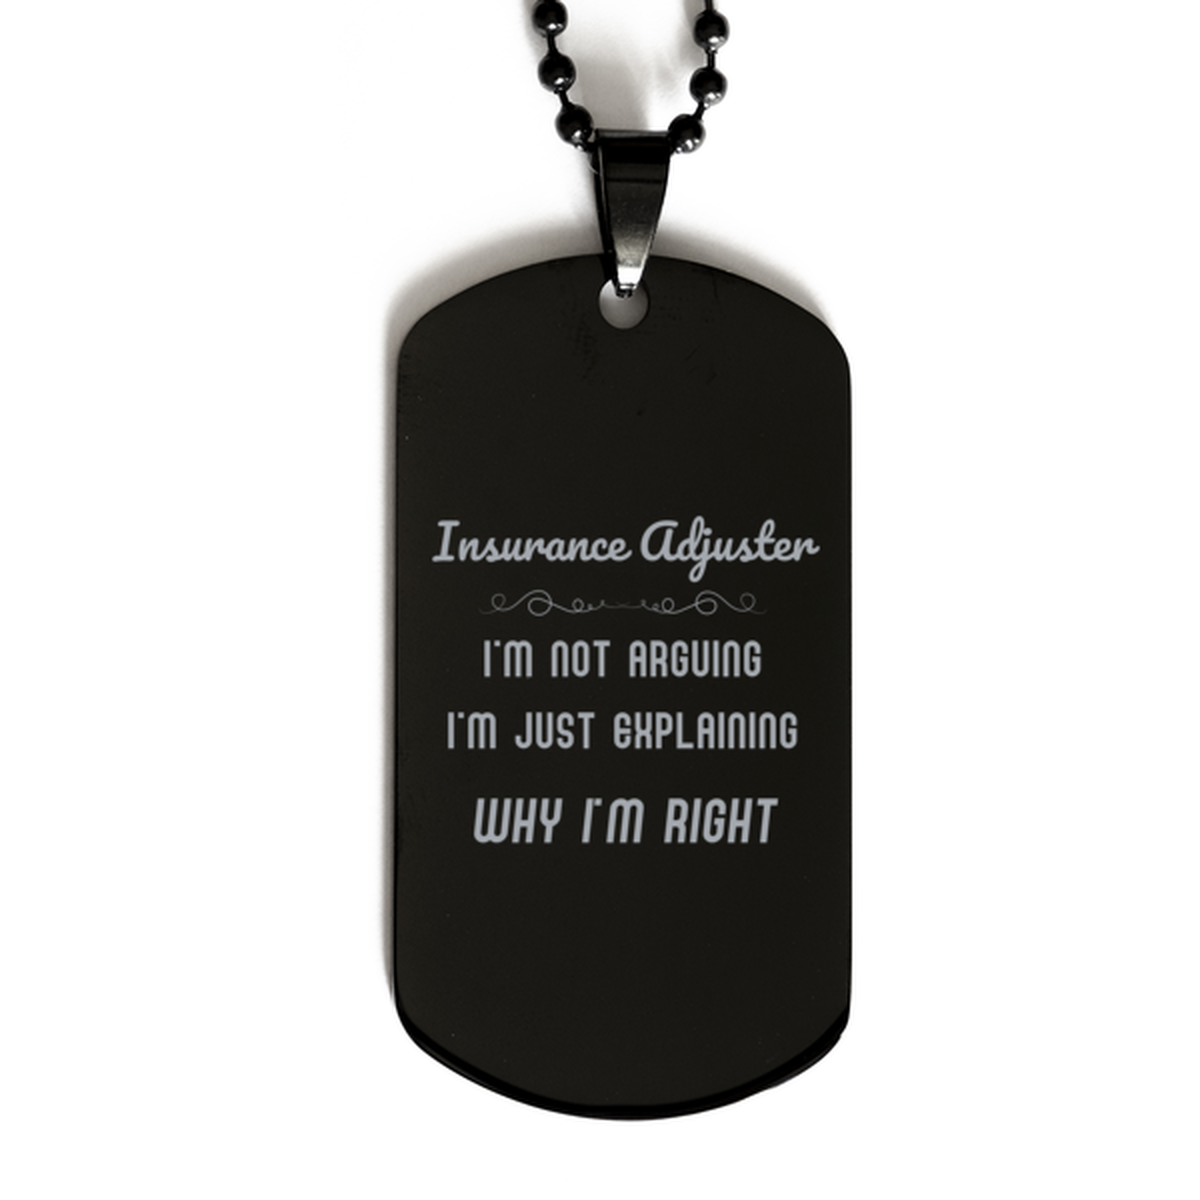 Insurance Adjuster I'm not Arguing. I'm Just Explaining Why I'm RIGHT Black Dog Tag, Funny Saying Quote Insurance Adjuster Gifts For Insurance Adjuster Graduation Birthday Christmas Gifts for Men Women Coworker